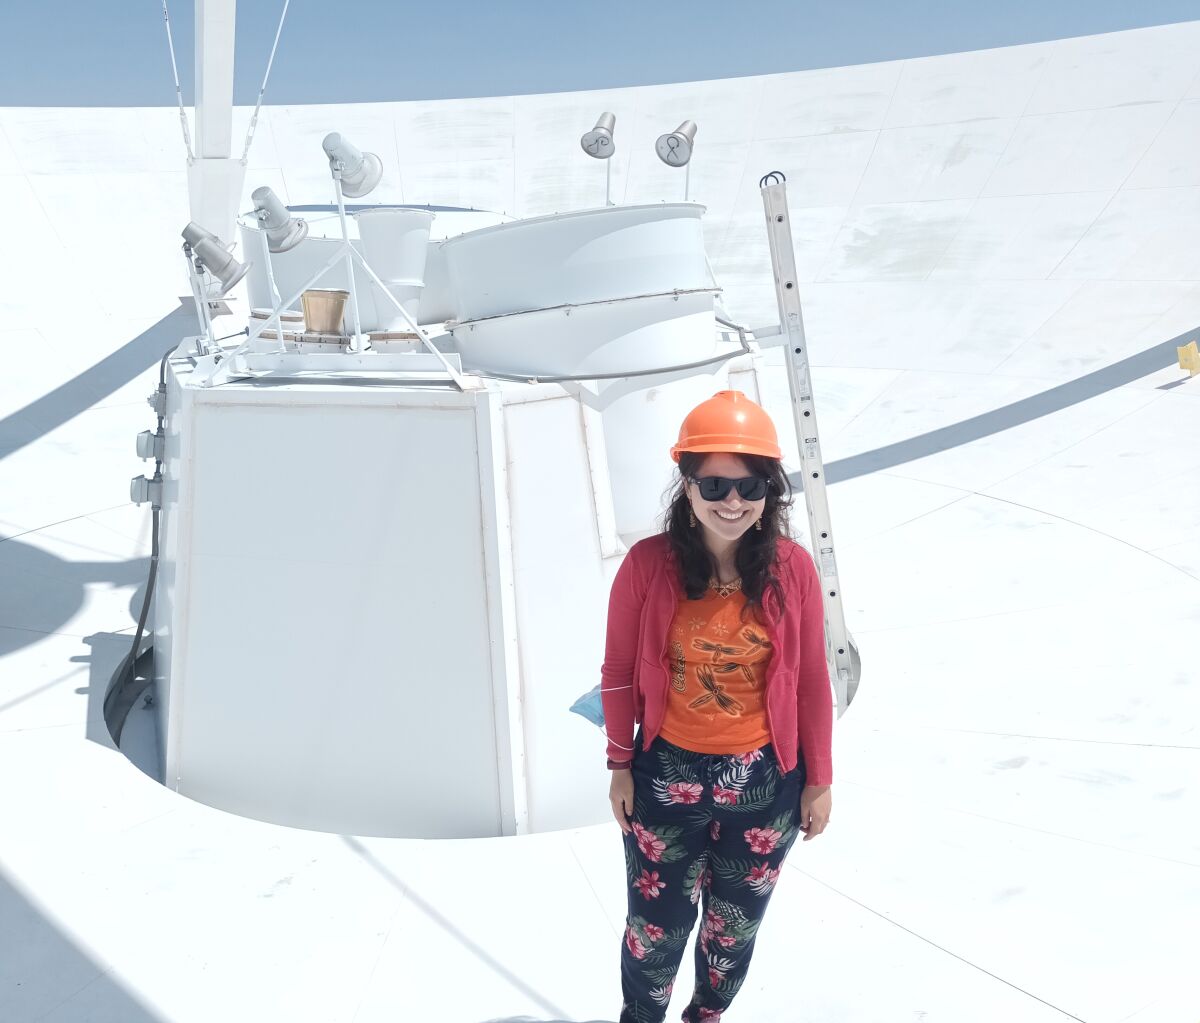 Sofía Rojas stands atop a large white receiver wearing sunglasses and a hard hat